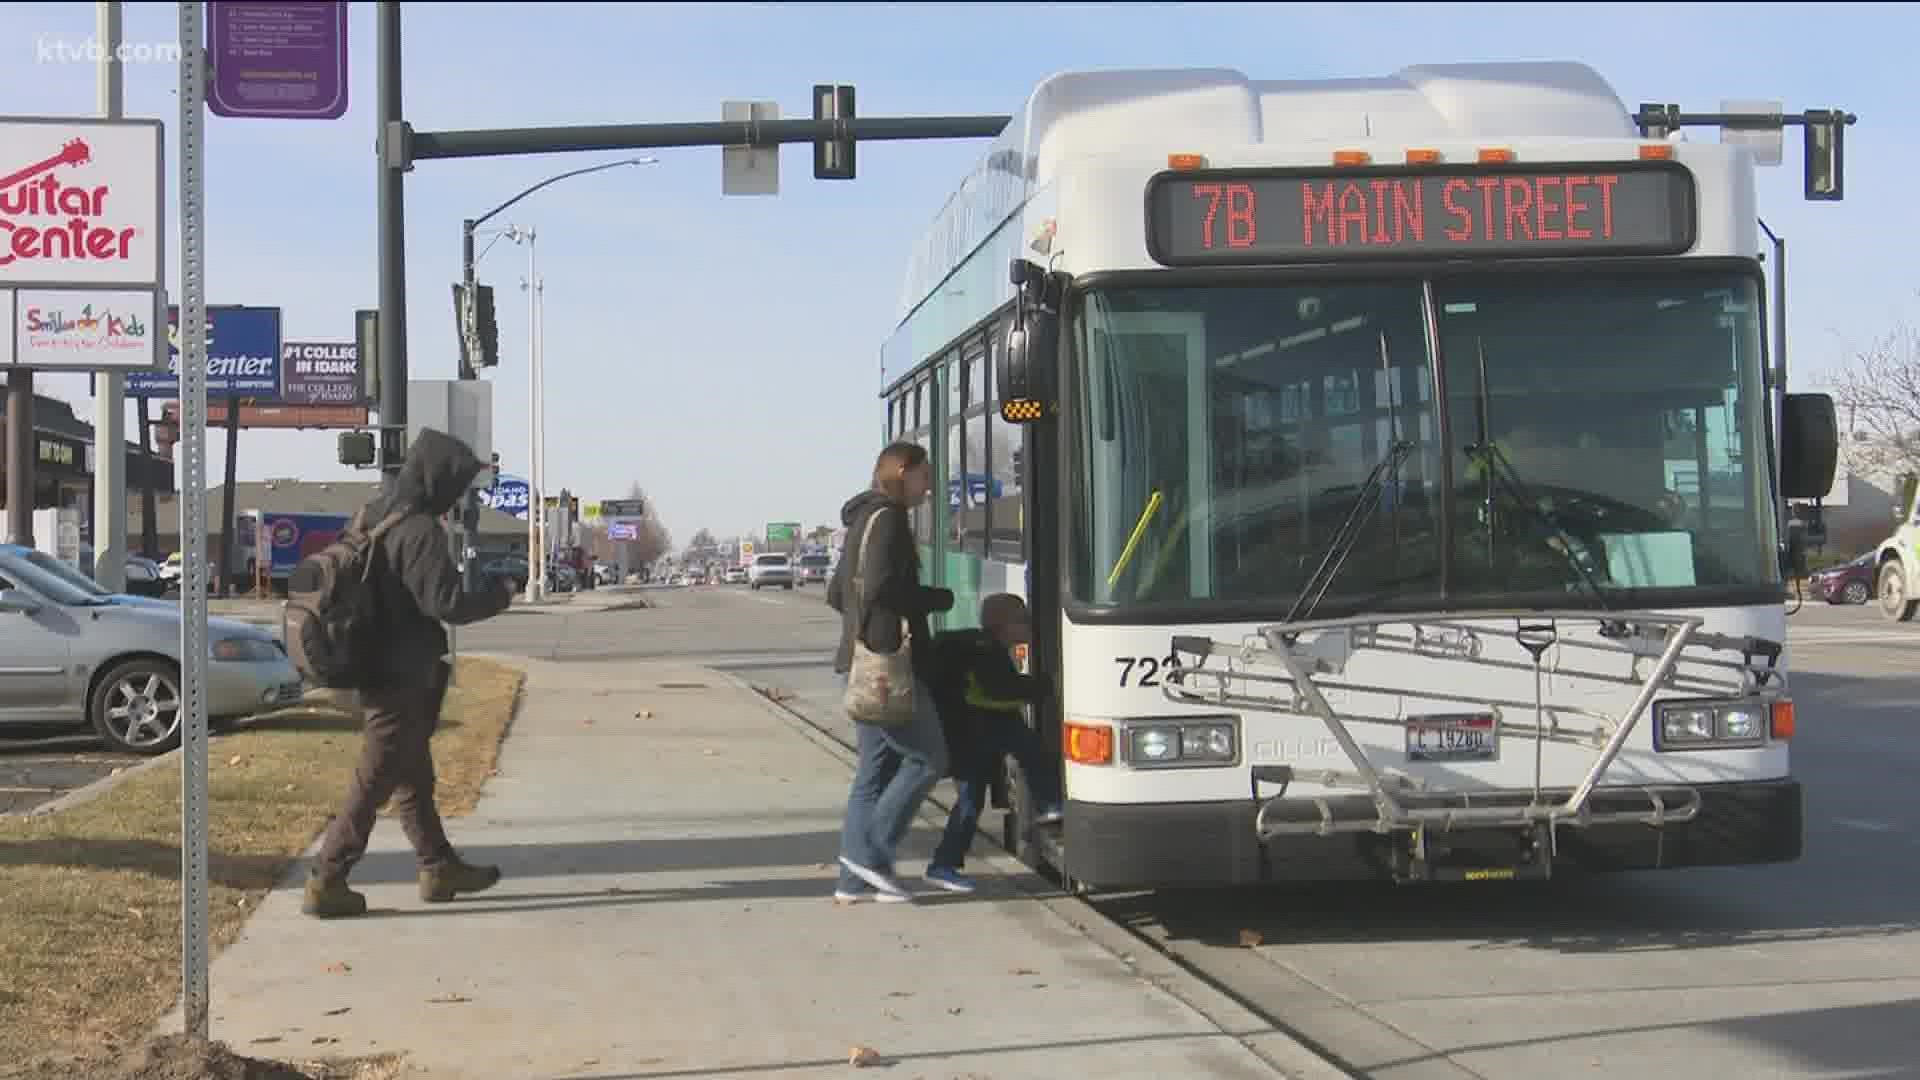 Boise is looking to fund VTR $8.7 million for the 2022 fiscal year but does not plan on increasing bus route frequency until ridership returns to pre-pandemic level.